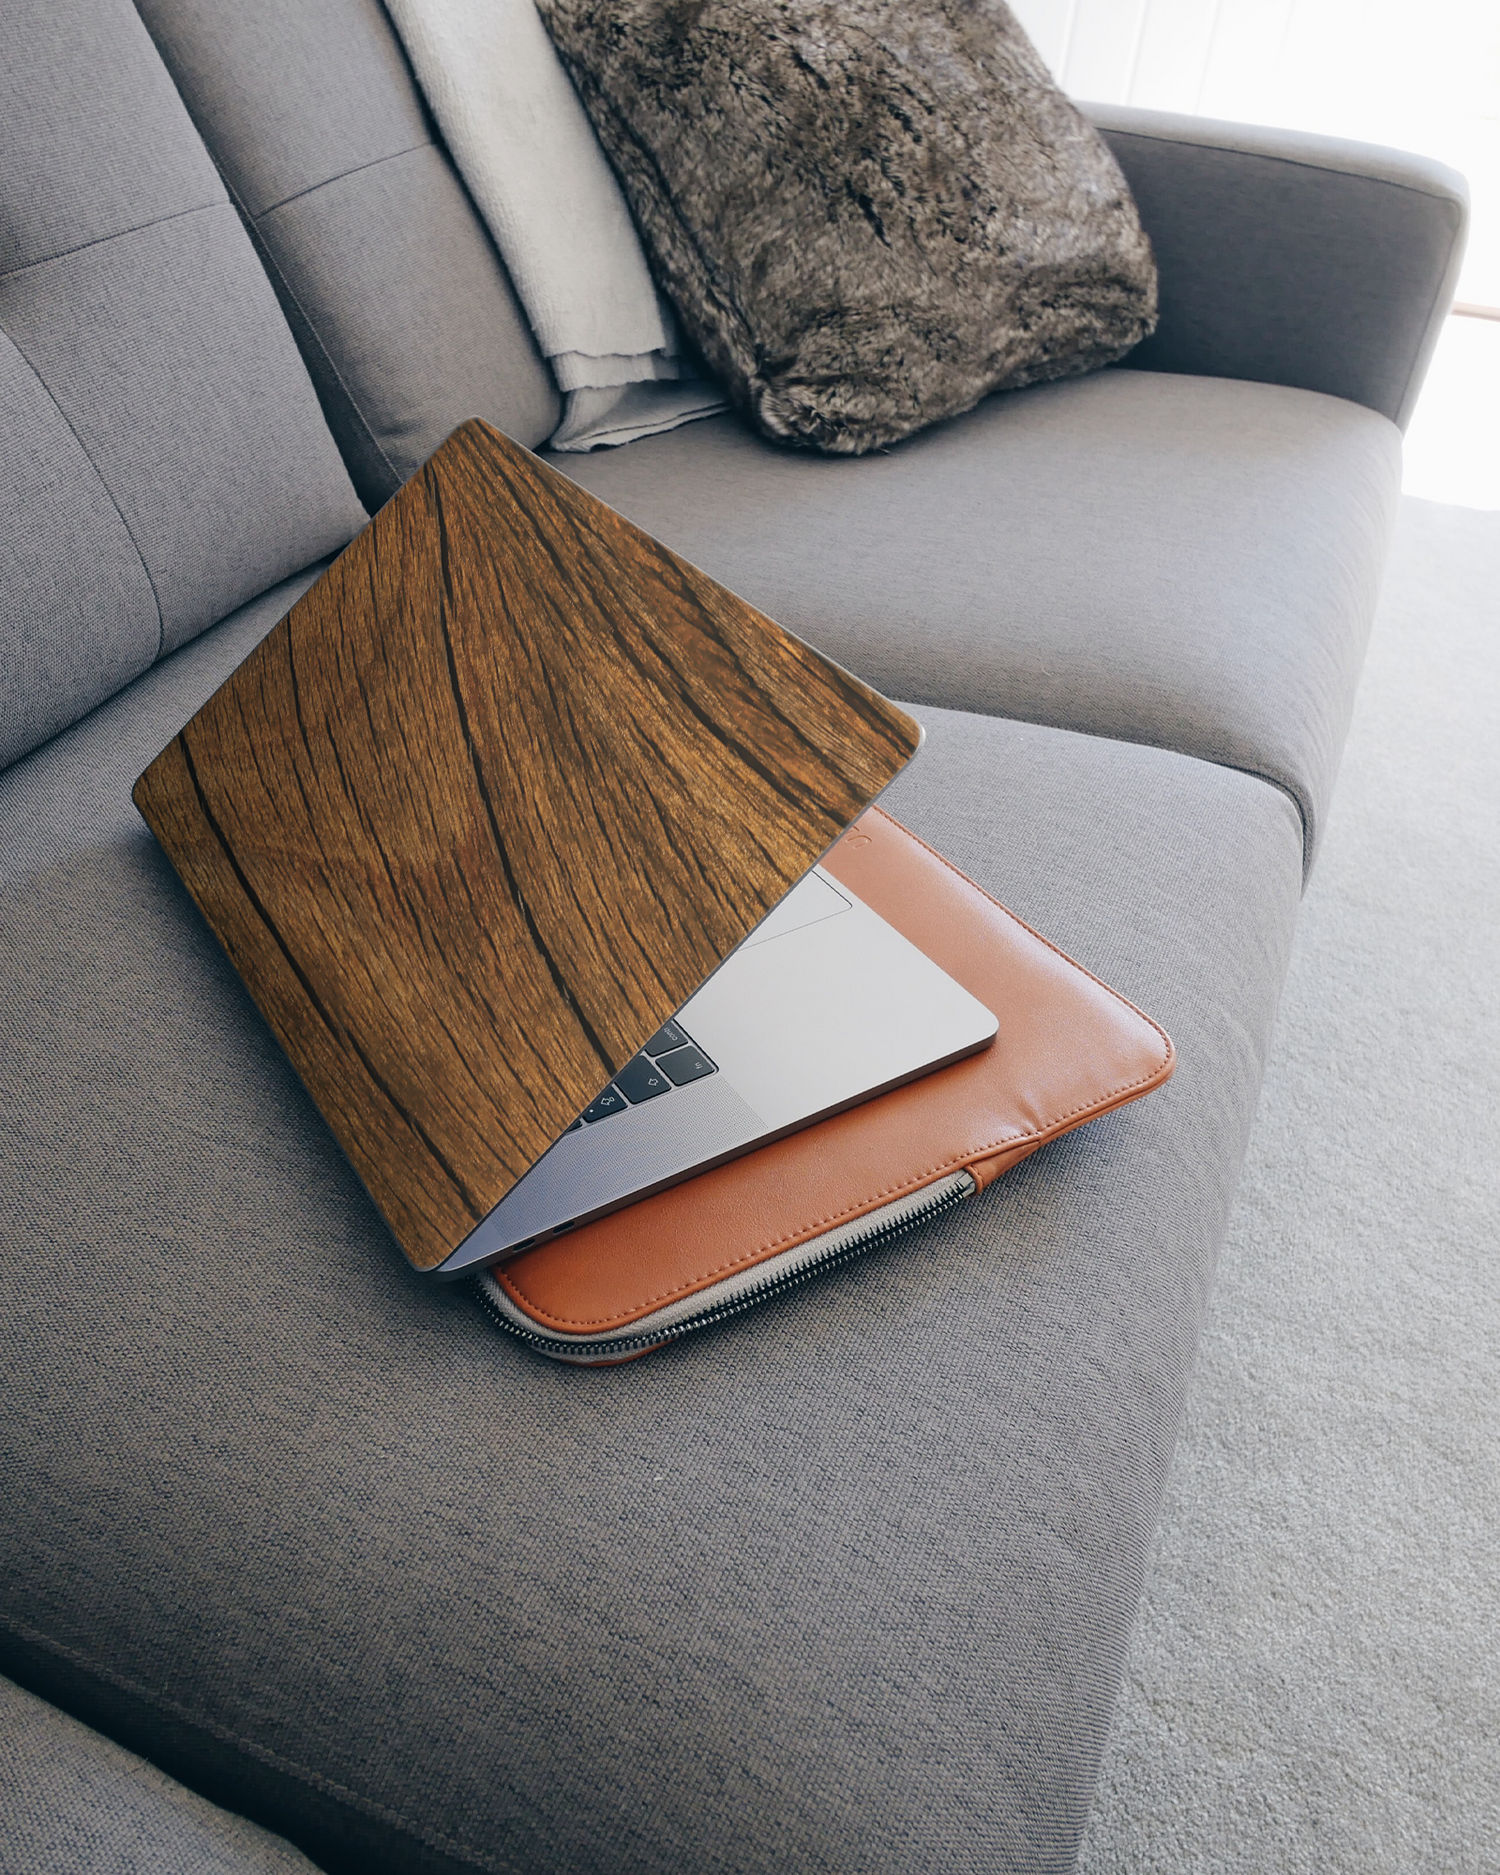 Wood Laptop Skin for 15 inch Apple MacBooks on a couch